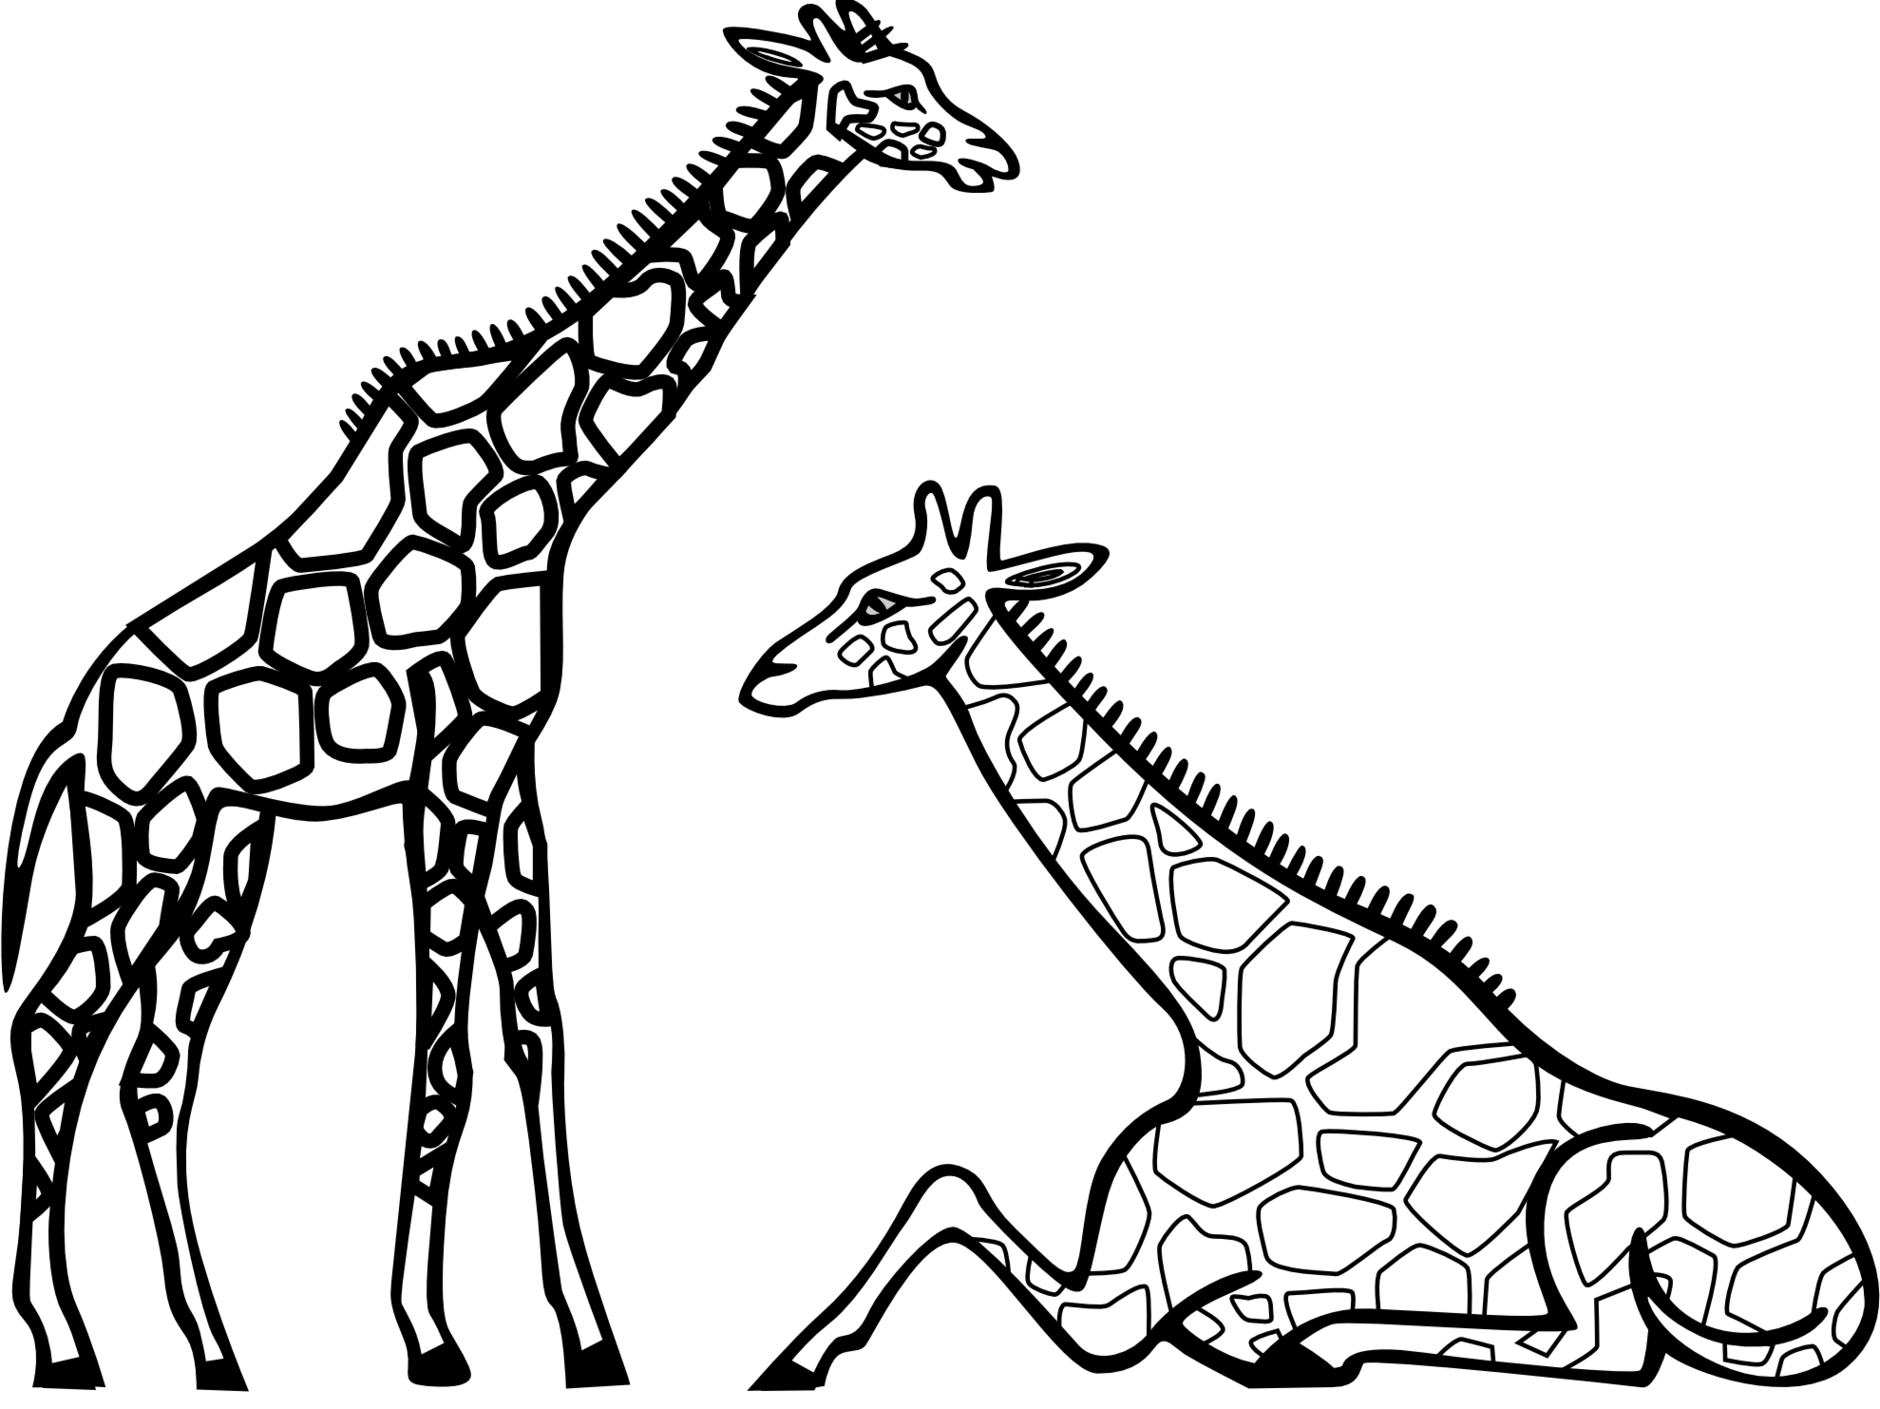 A Couple Of Giraffes On A Black Background